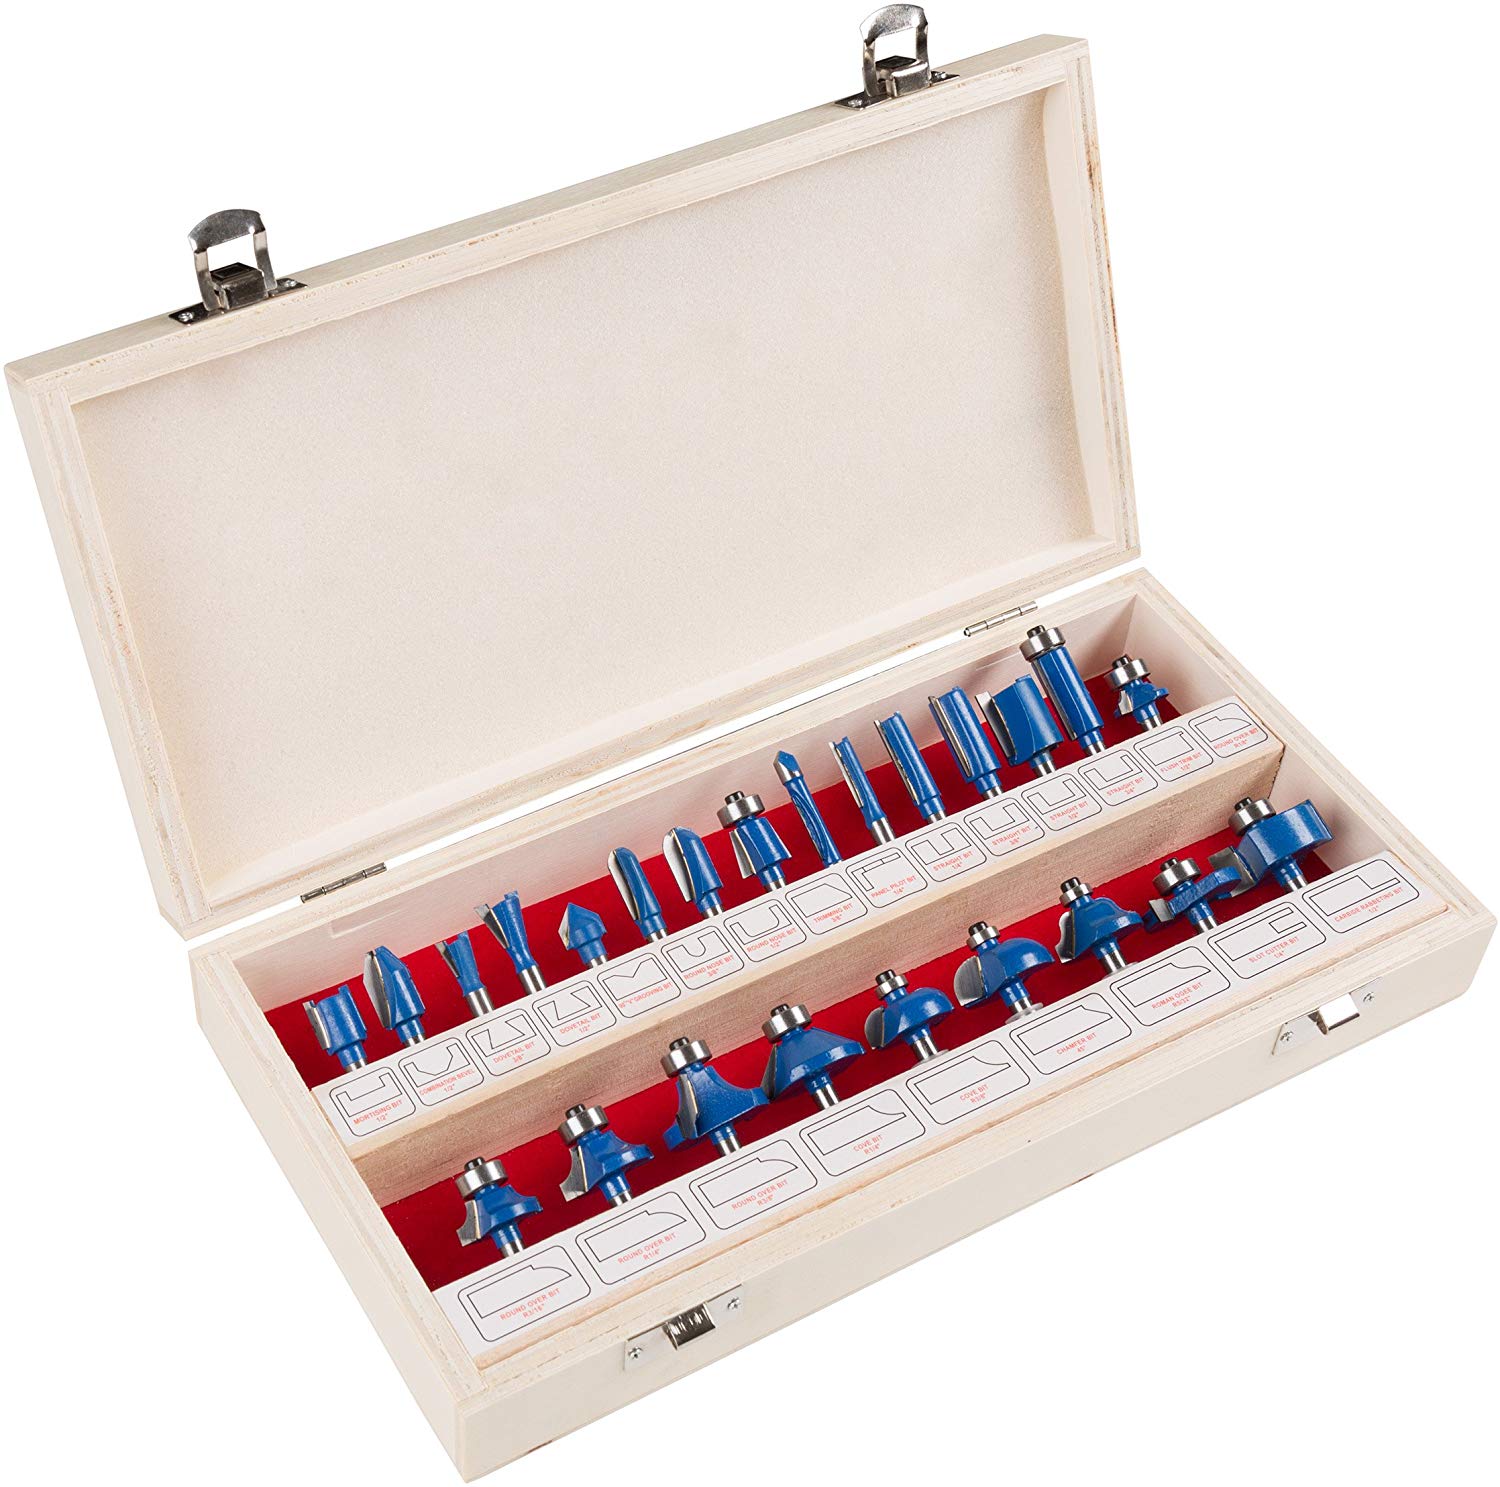 Stalwart Router Bit Set- 24 Piece Kit with ¼” Shank and Wood Storage Case